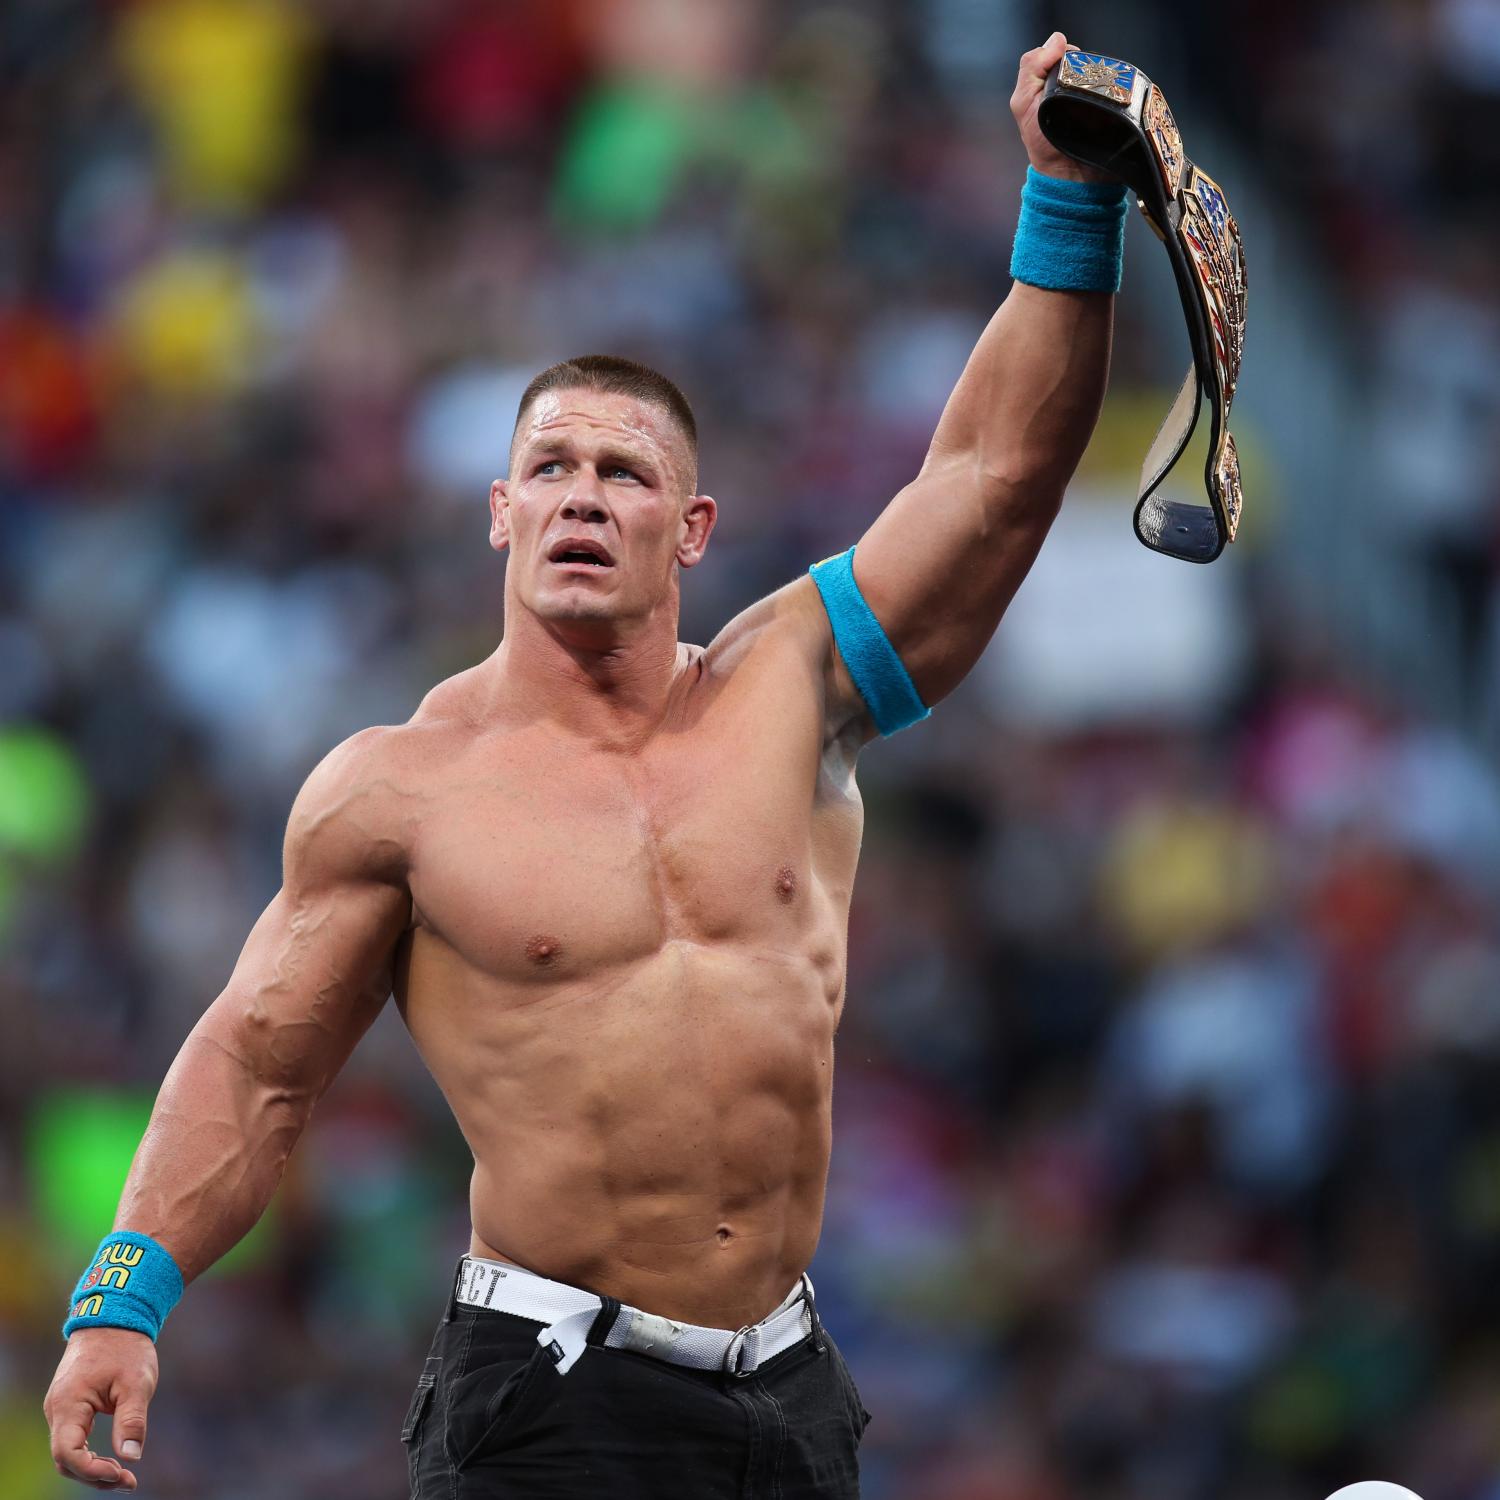 beautiful john cena with medal mobile desktop hd pictures free